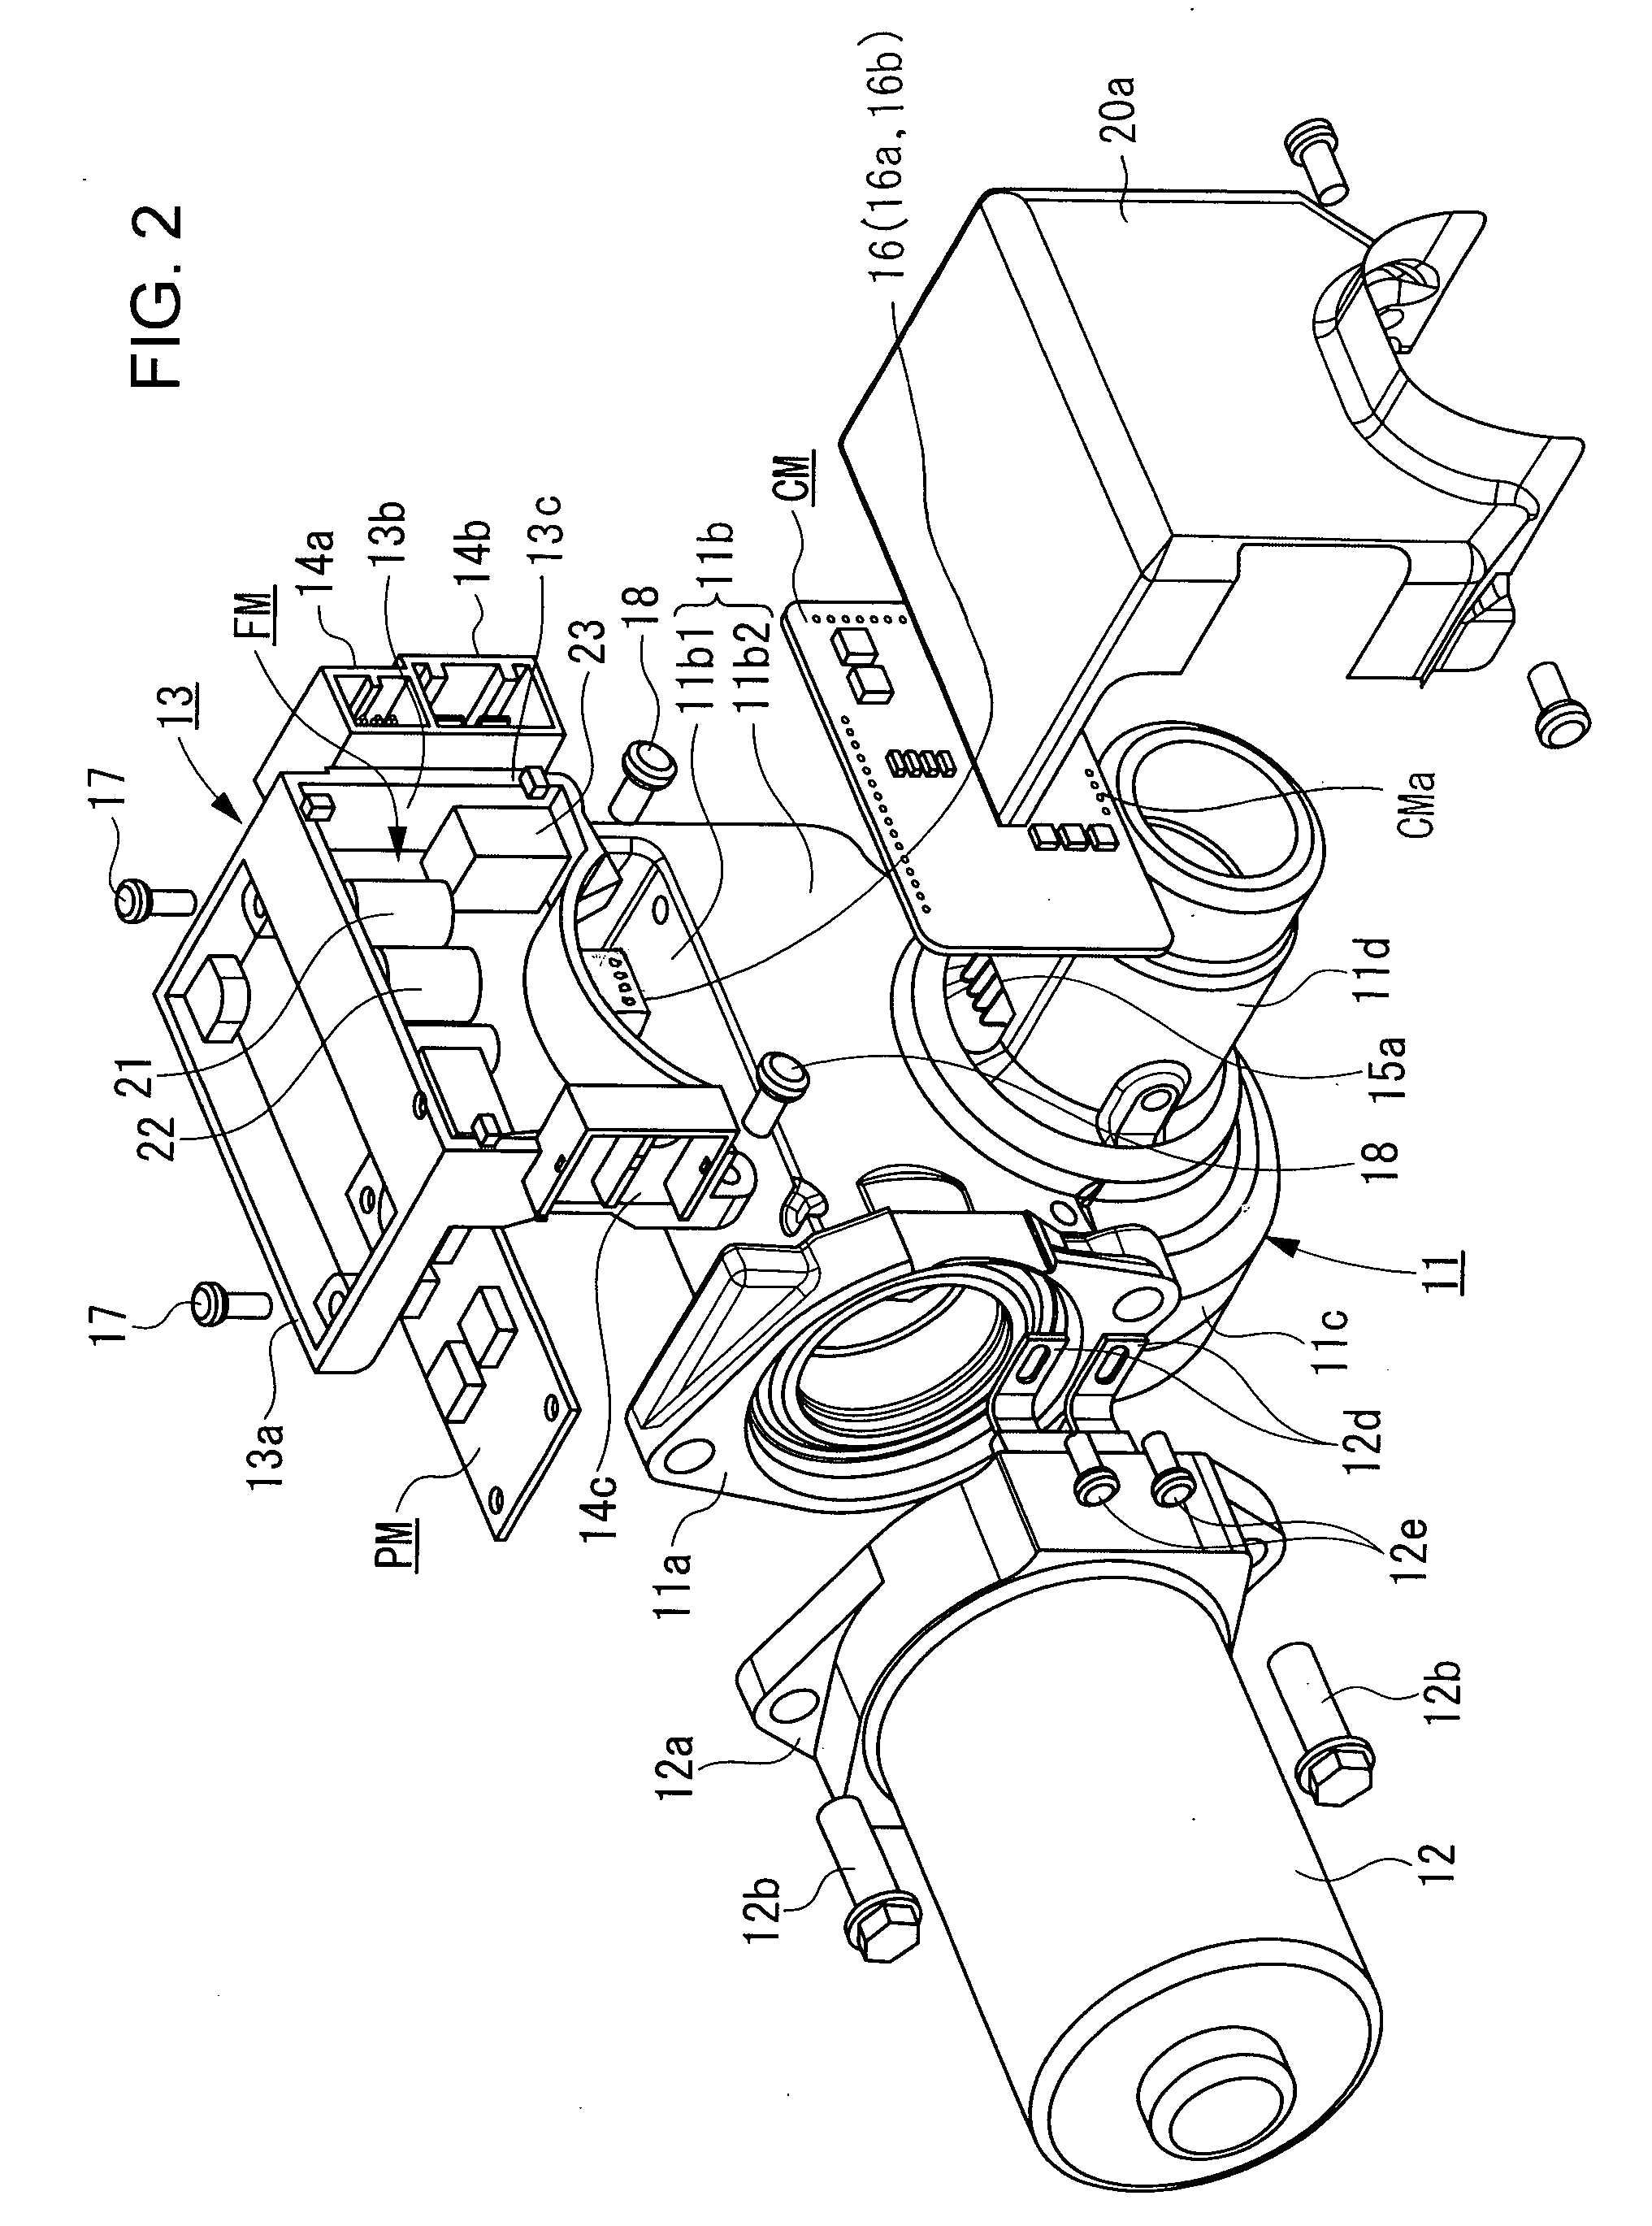 Electric Power Steering Device